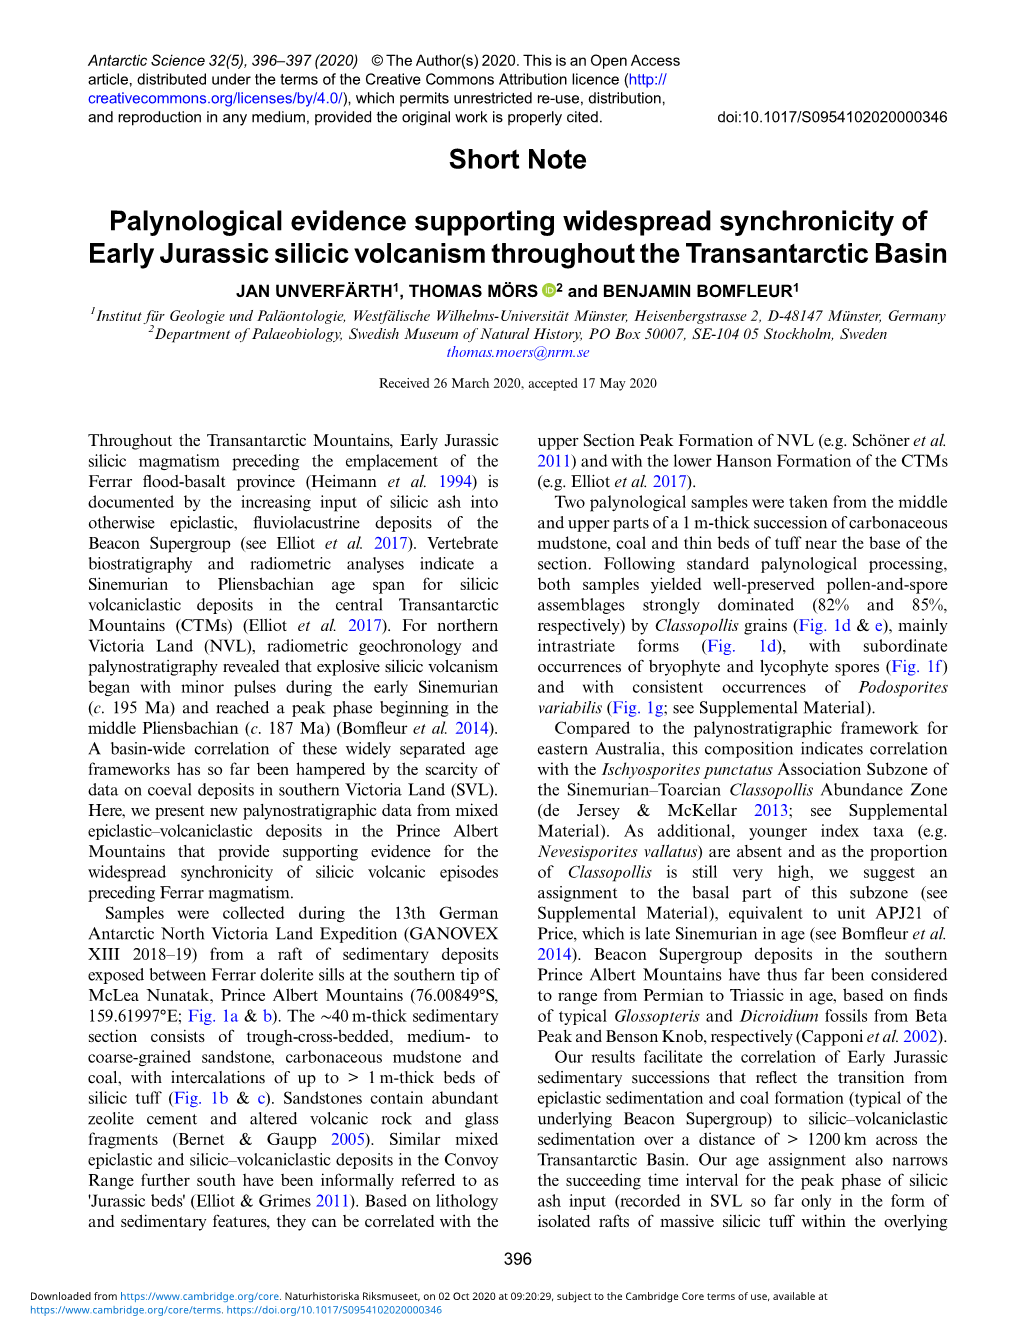 Short Note Palynological Evidence Supporting Widespread